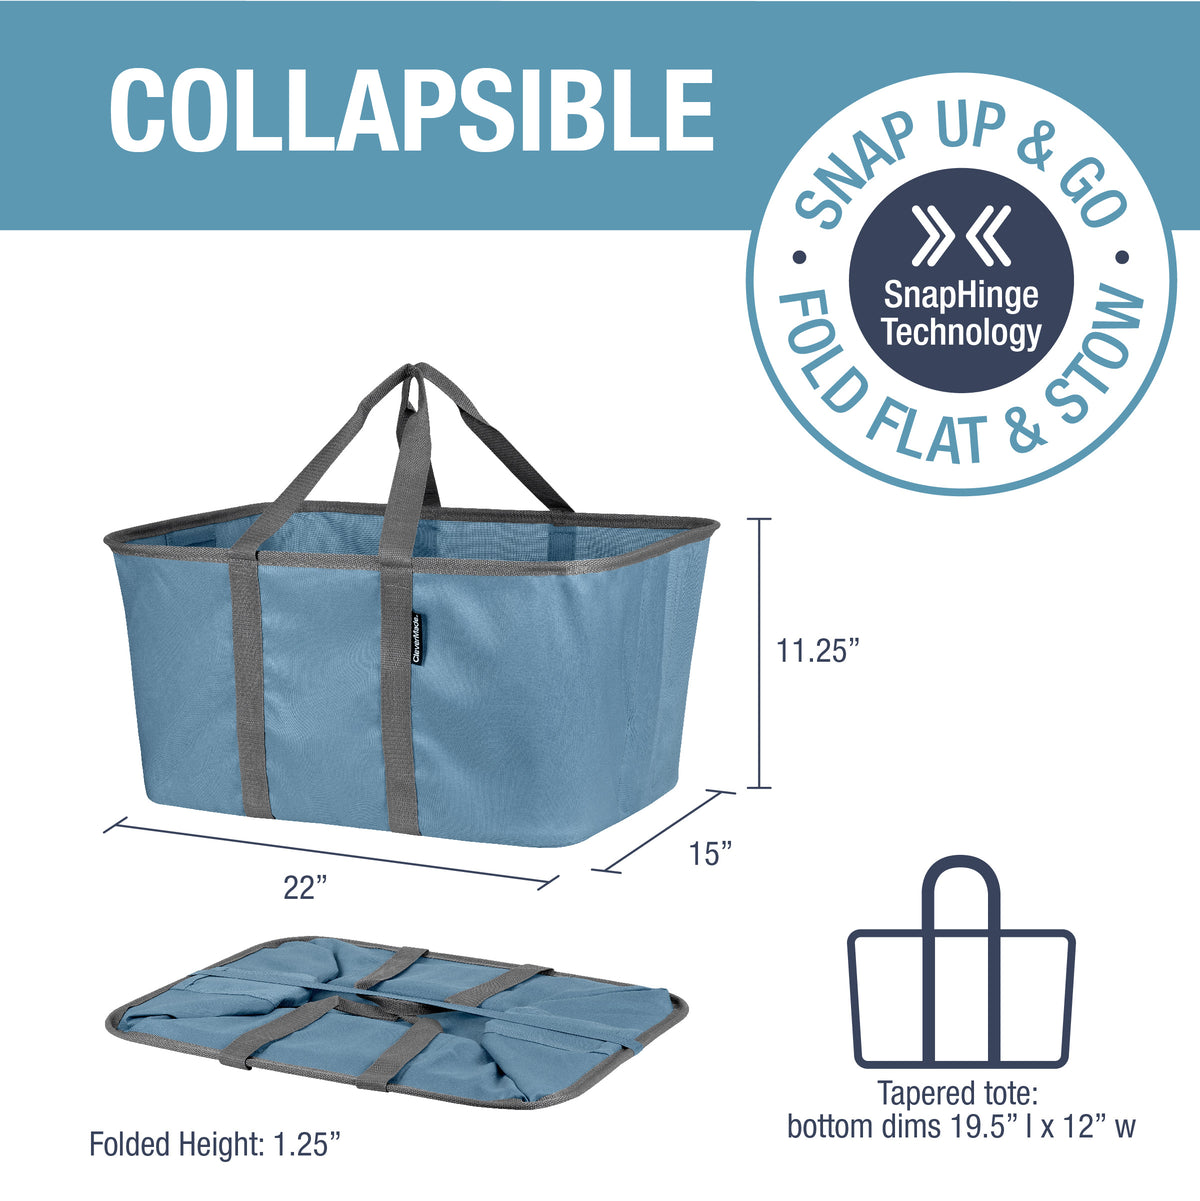 Costco Shop With Me - Collapsible Laundry Basket 